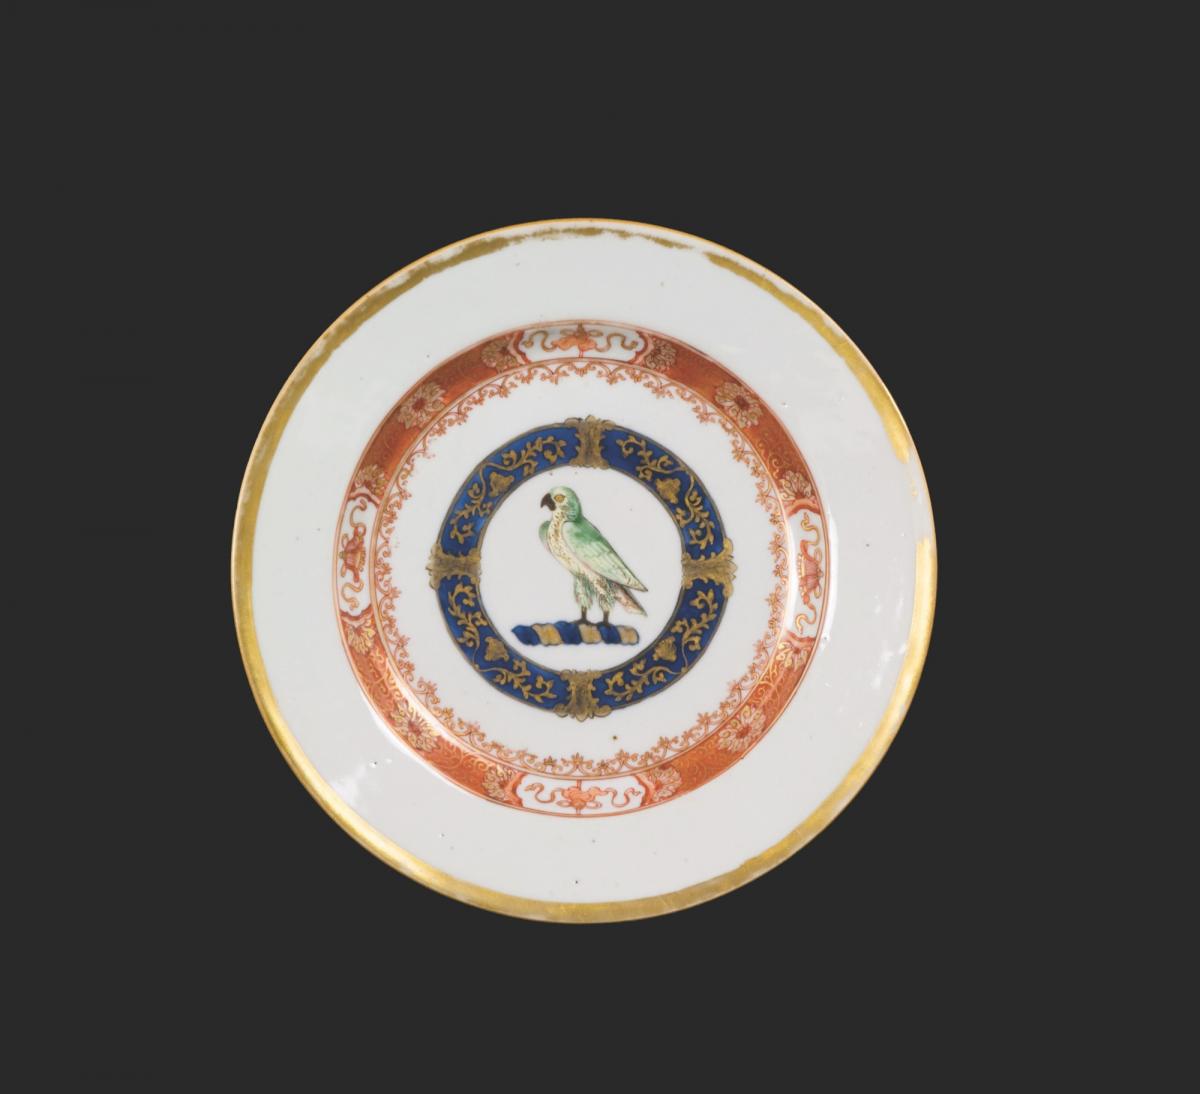 A Chinese Export 'Famille-Verte' Porcelain Armorial Plate, Qing Dynasty, Yongzheng Period